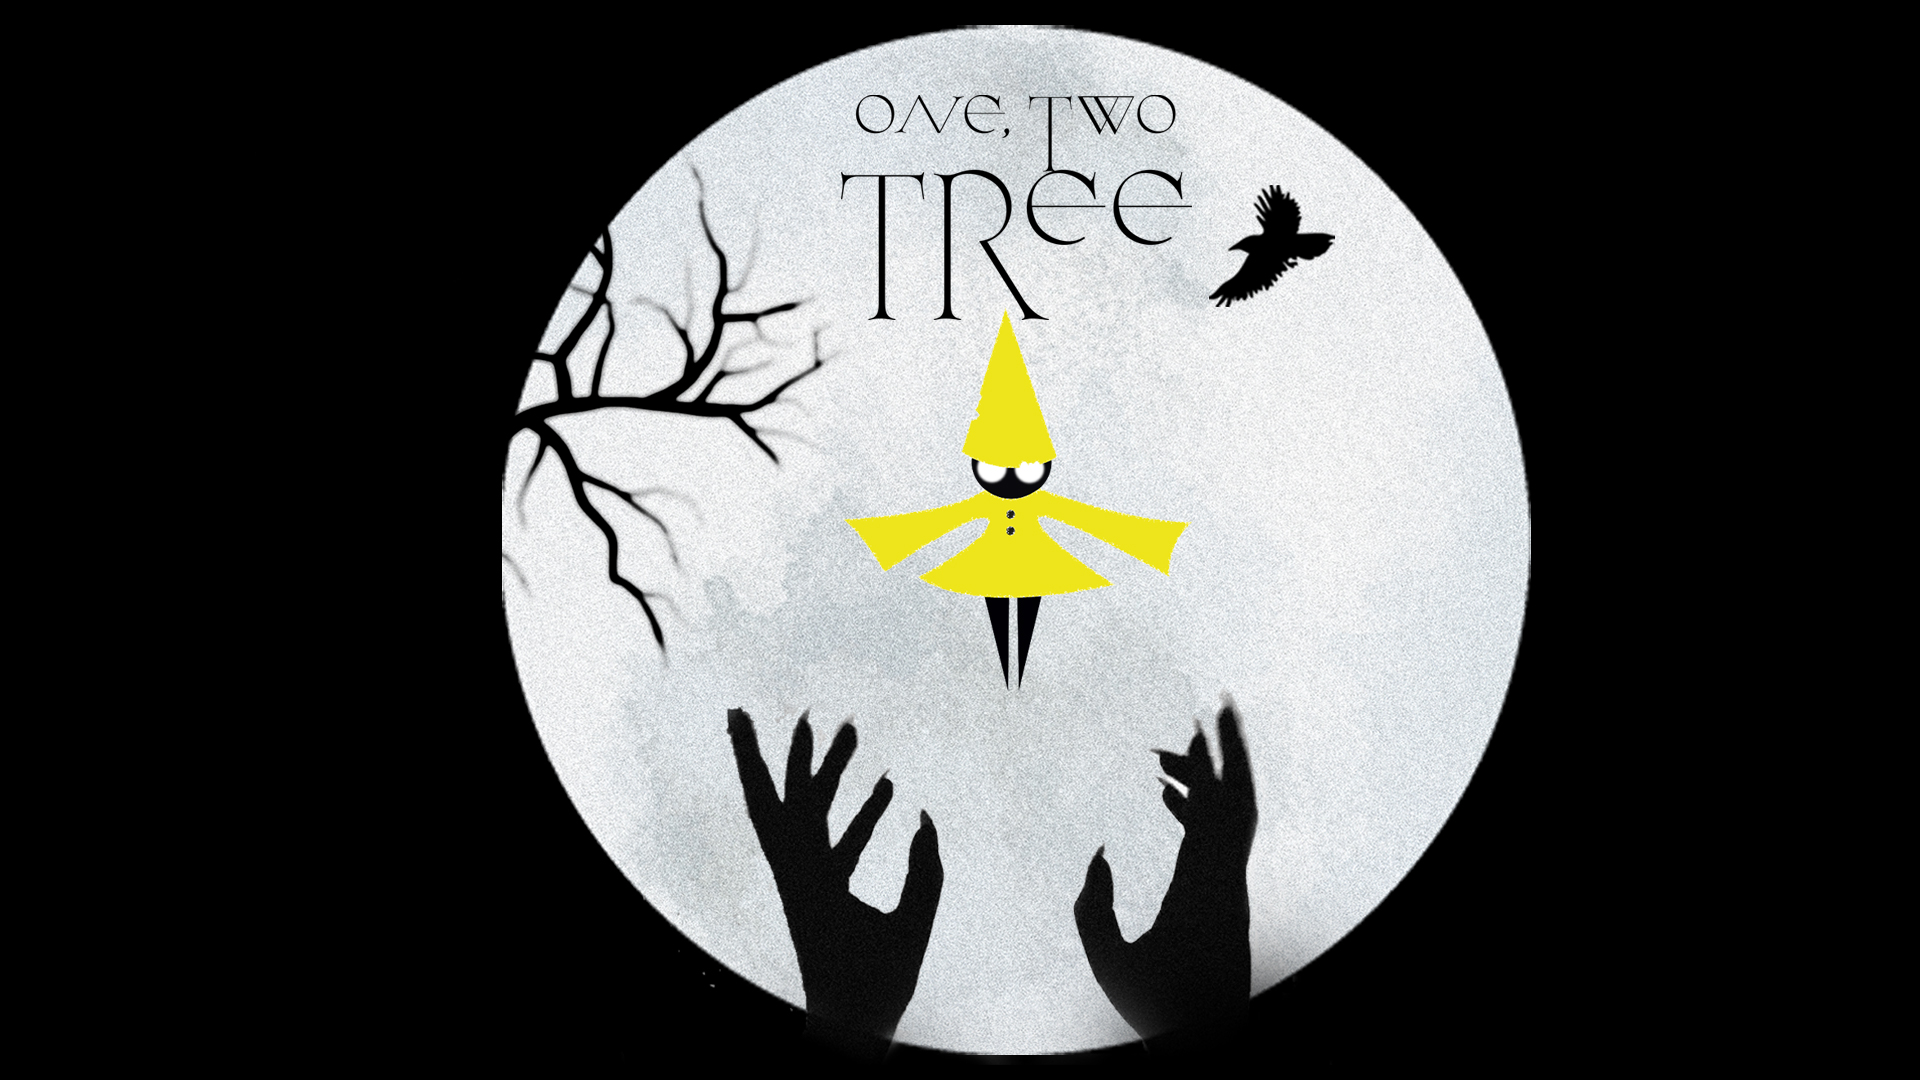 One two tree